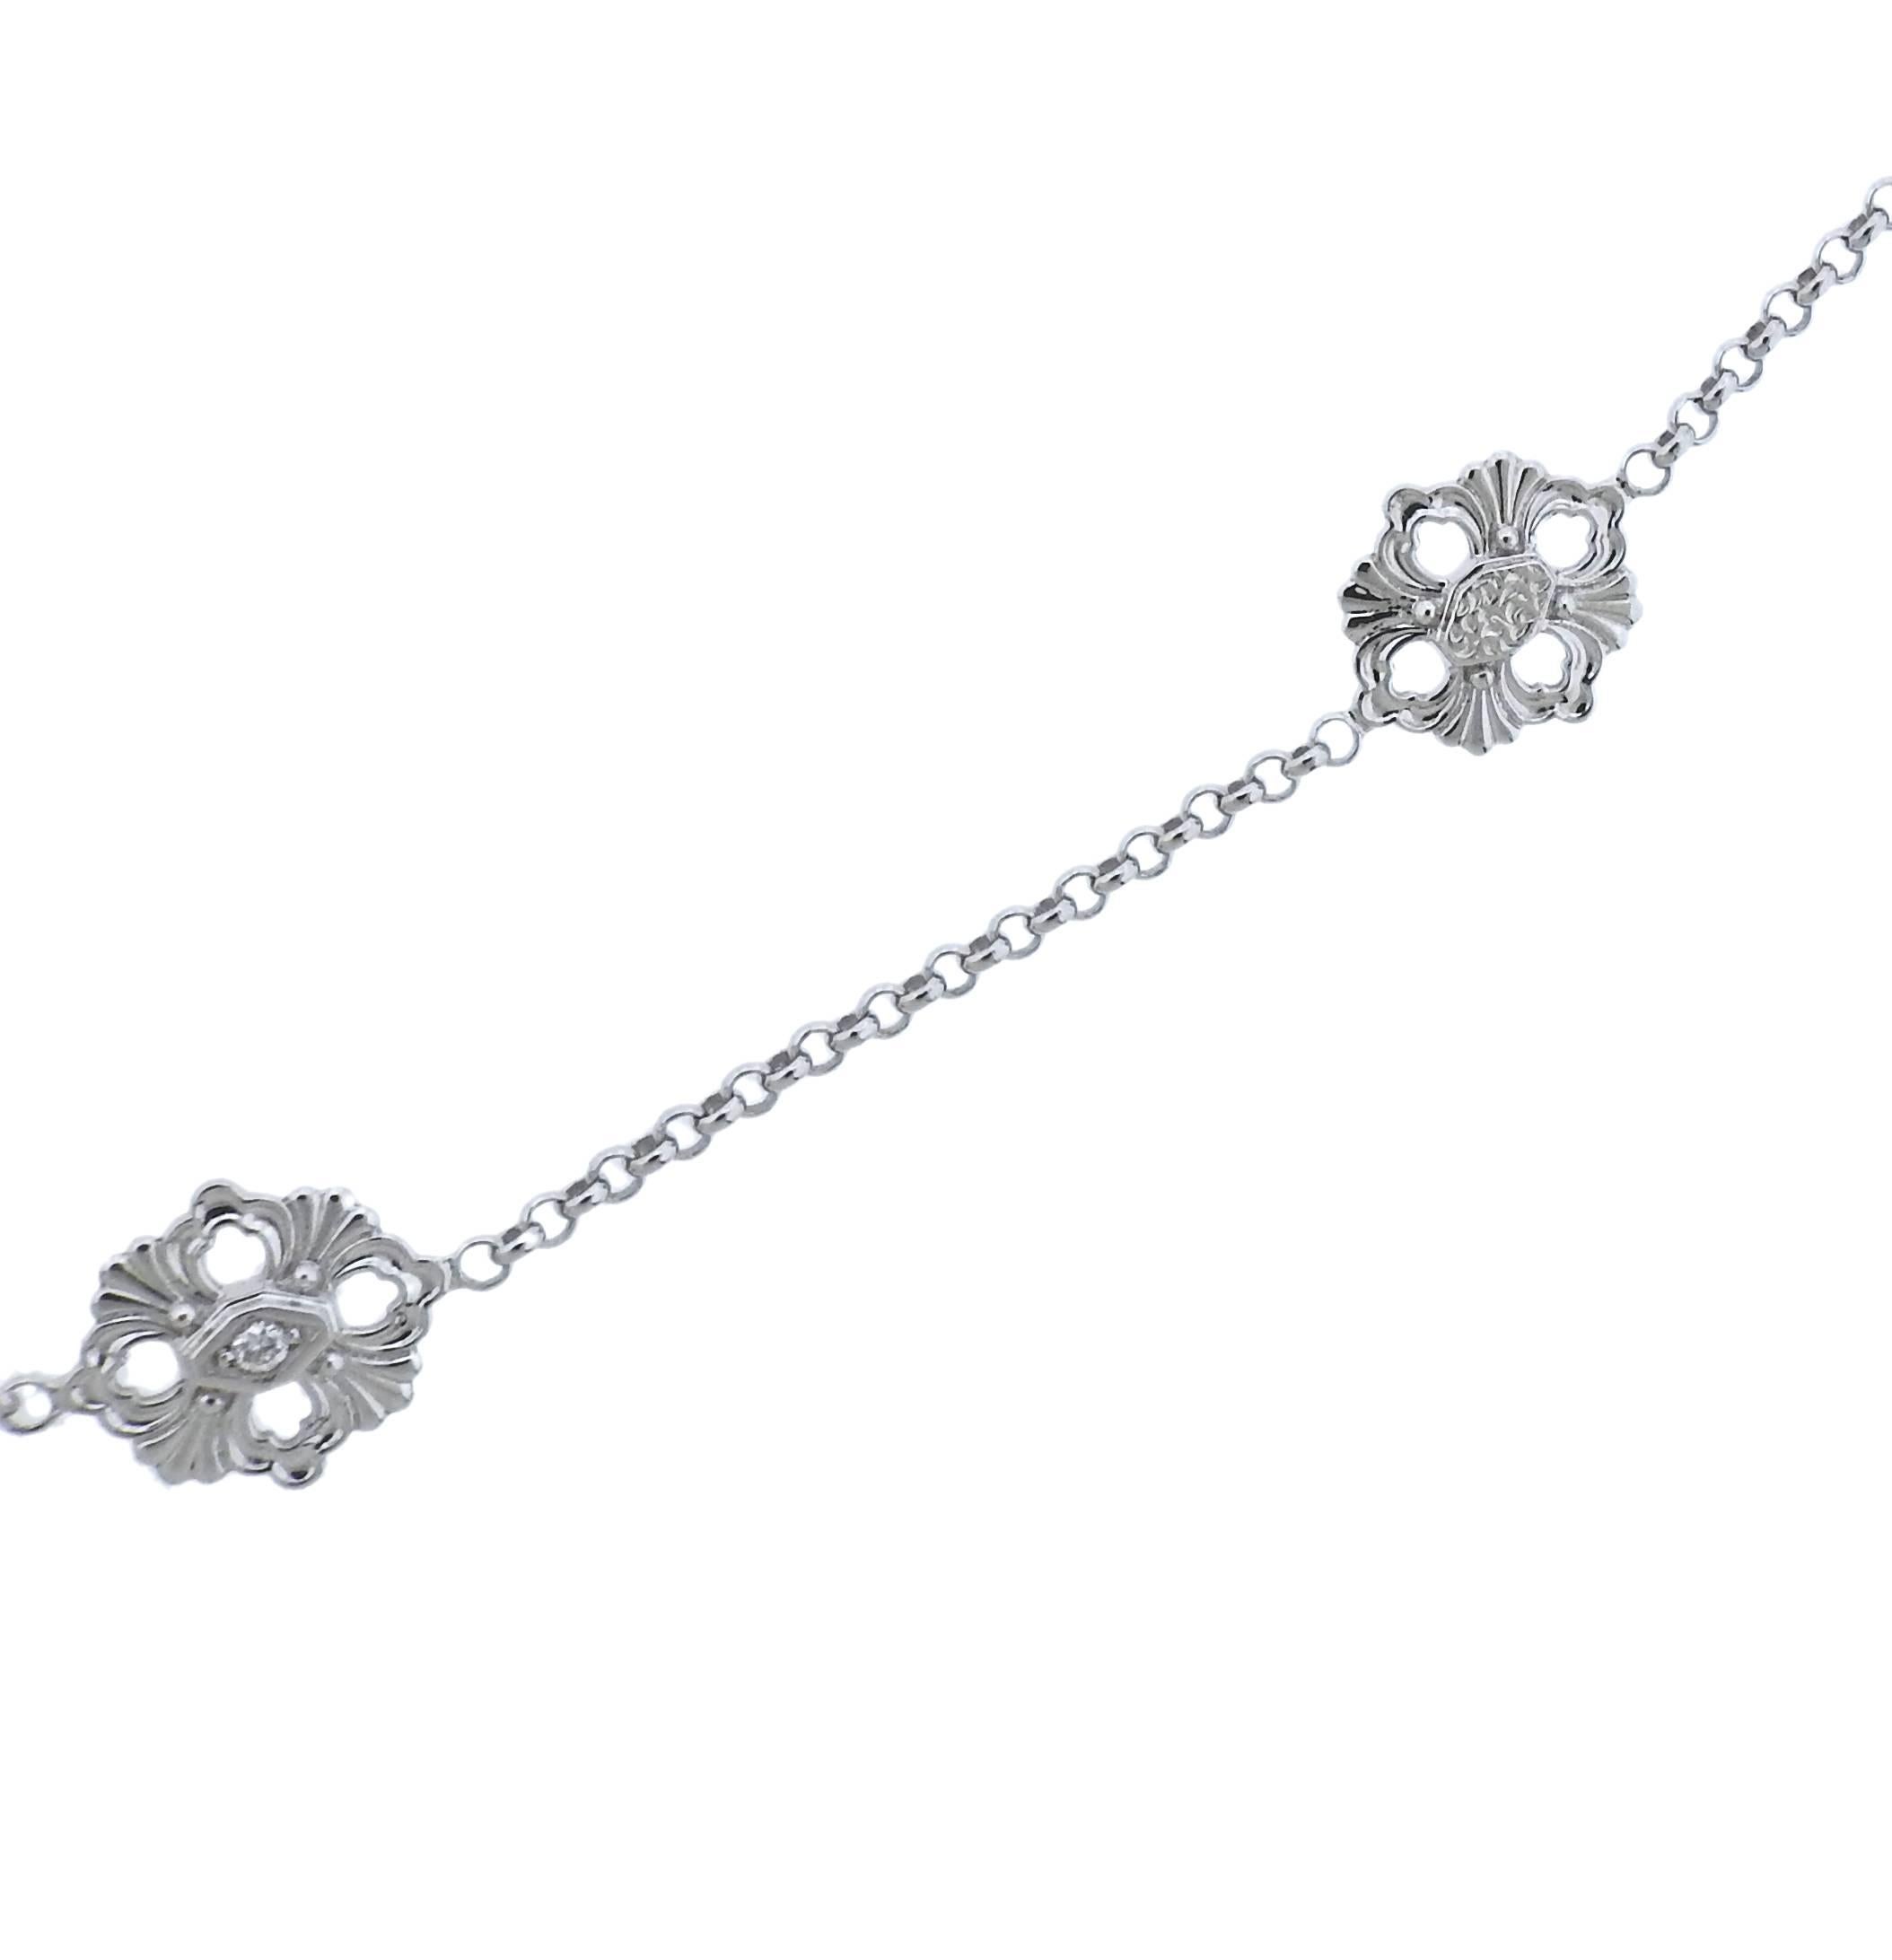 18k white gold station necklace crafted by Buccellati. Necklace measures 35.5